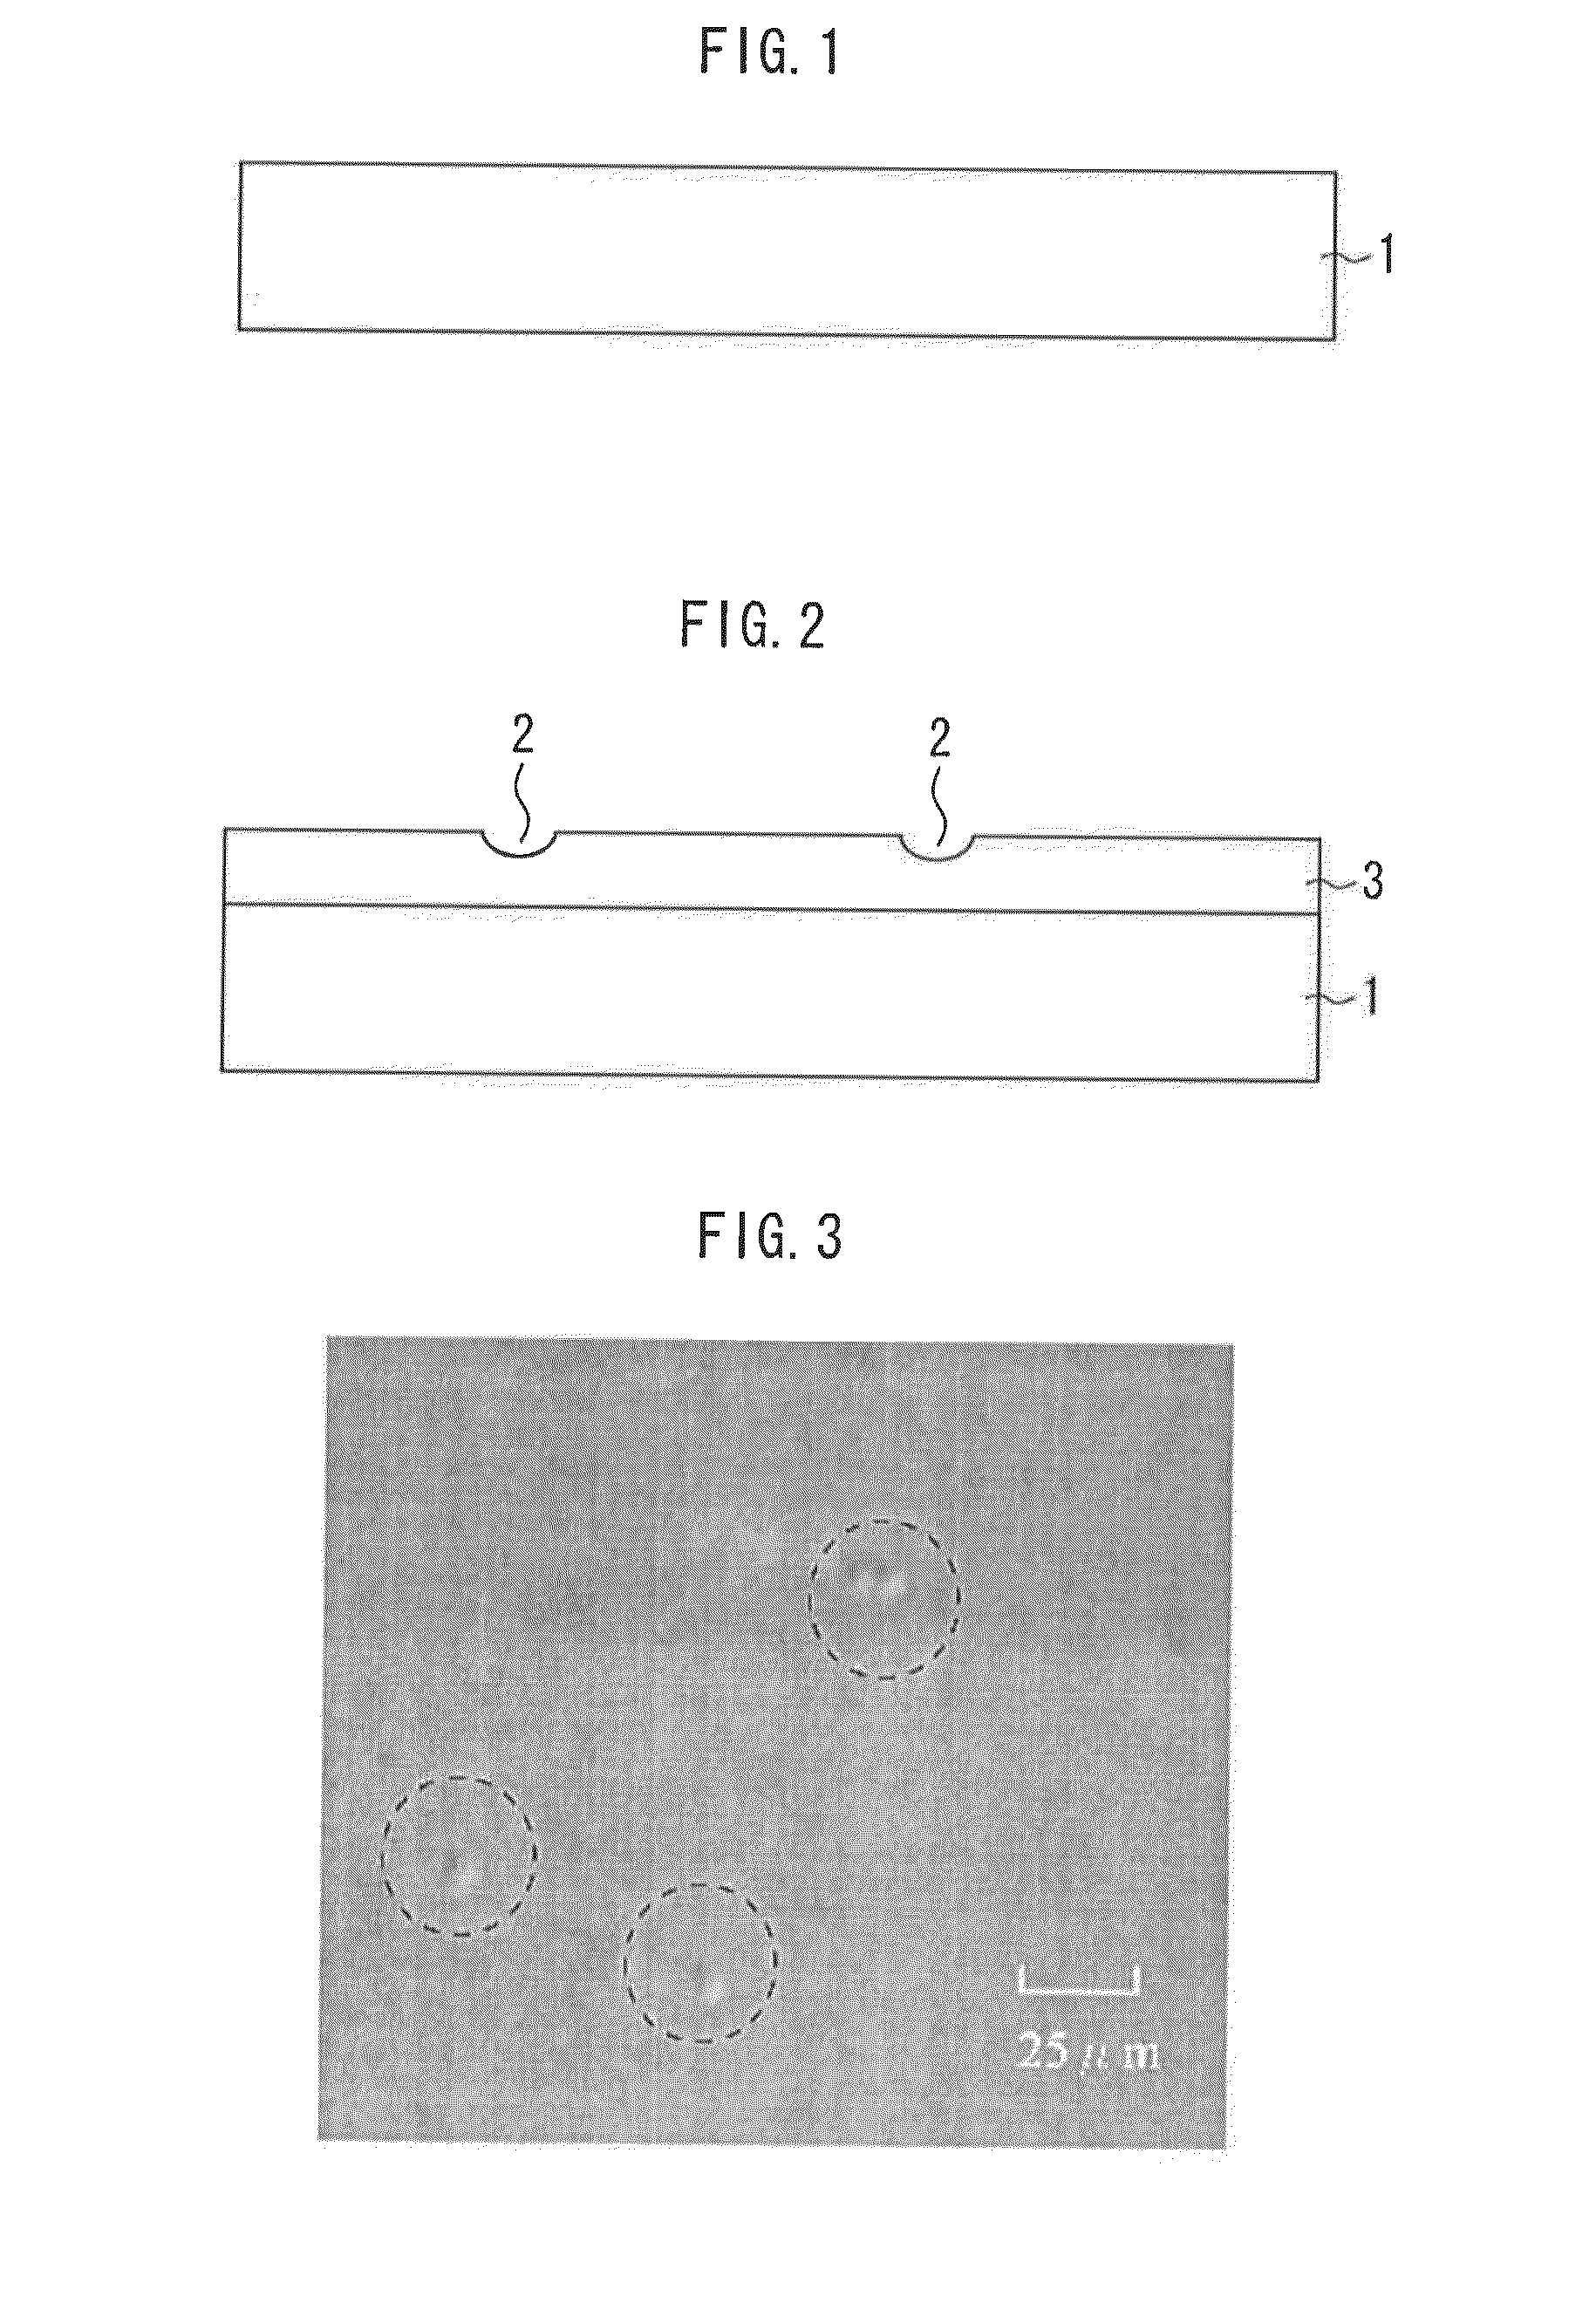 SINGLE-CRYSTAL 4H-SiC SUBSTRATE AND METHOD FOR MANUFACTURING THE SAME